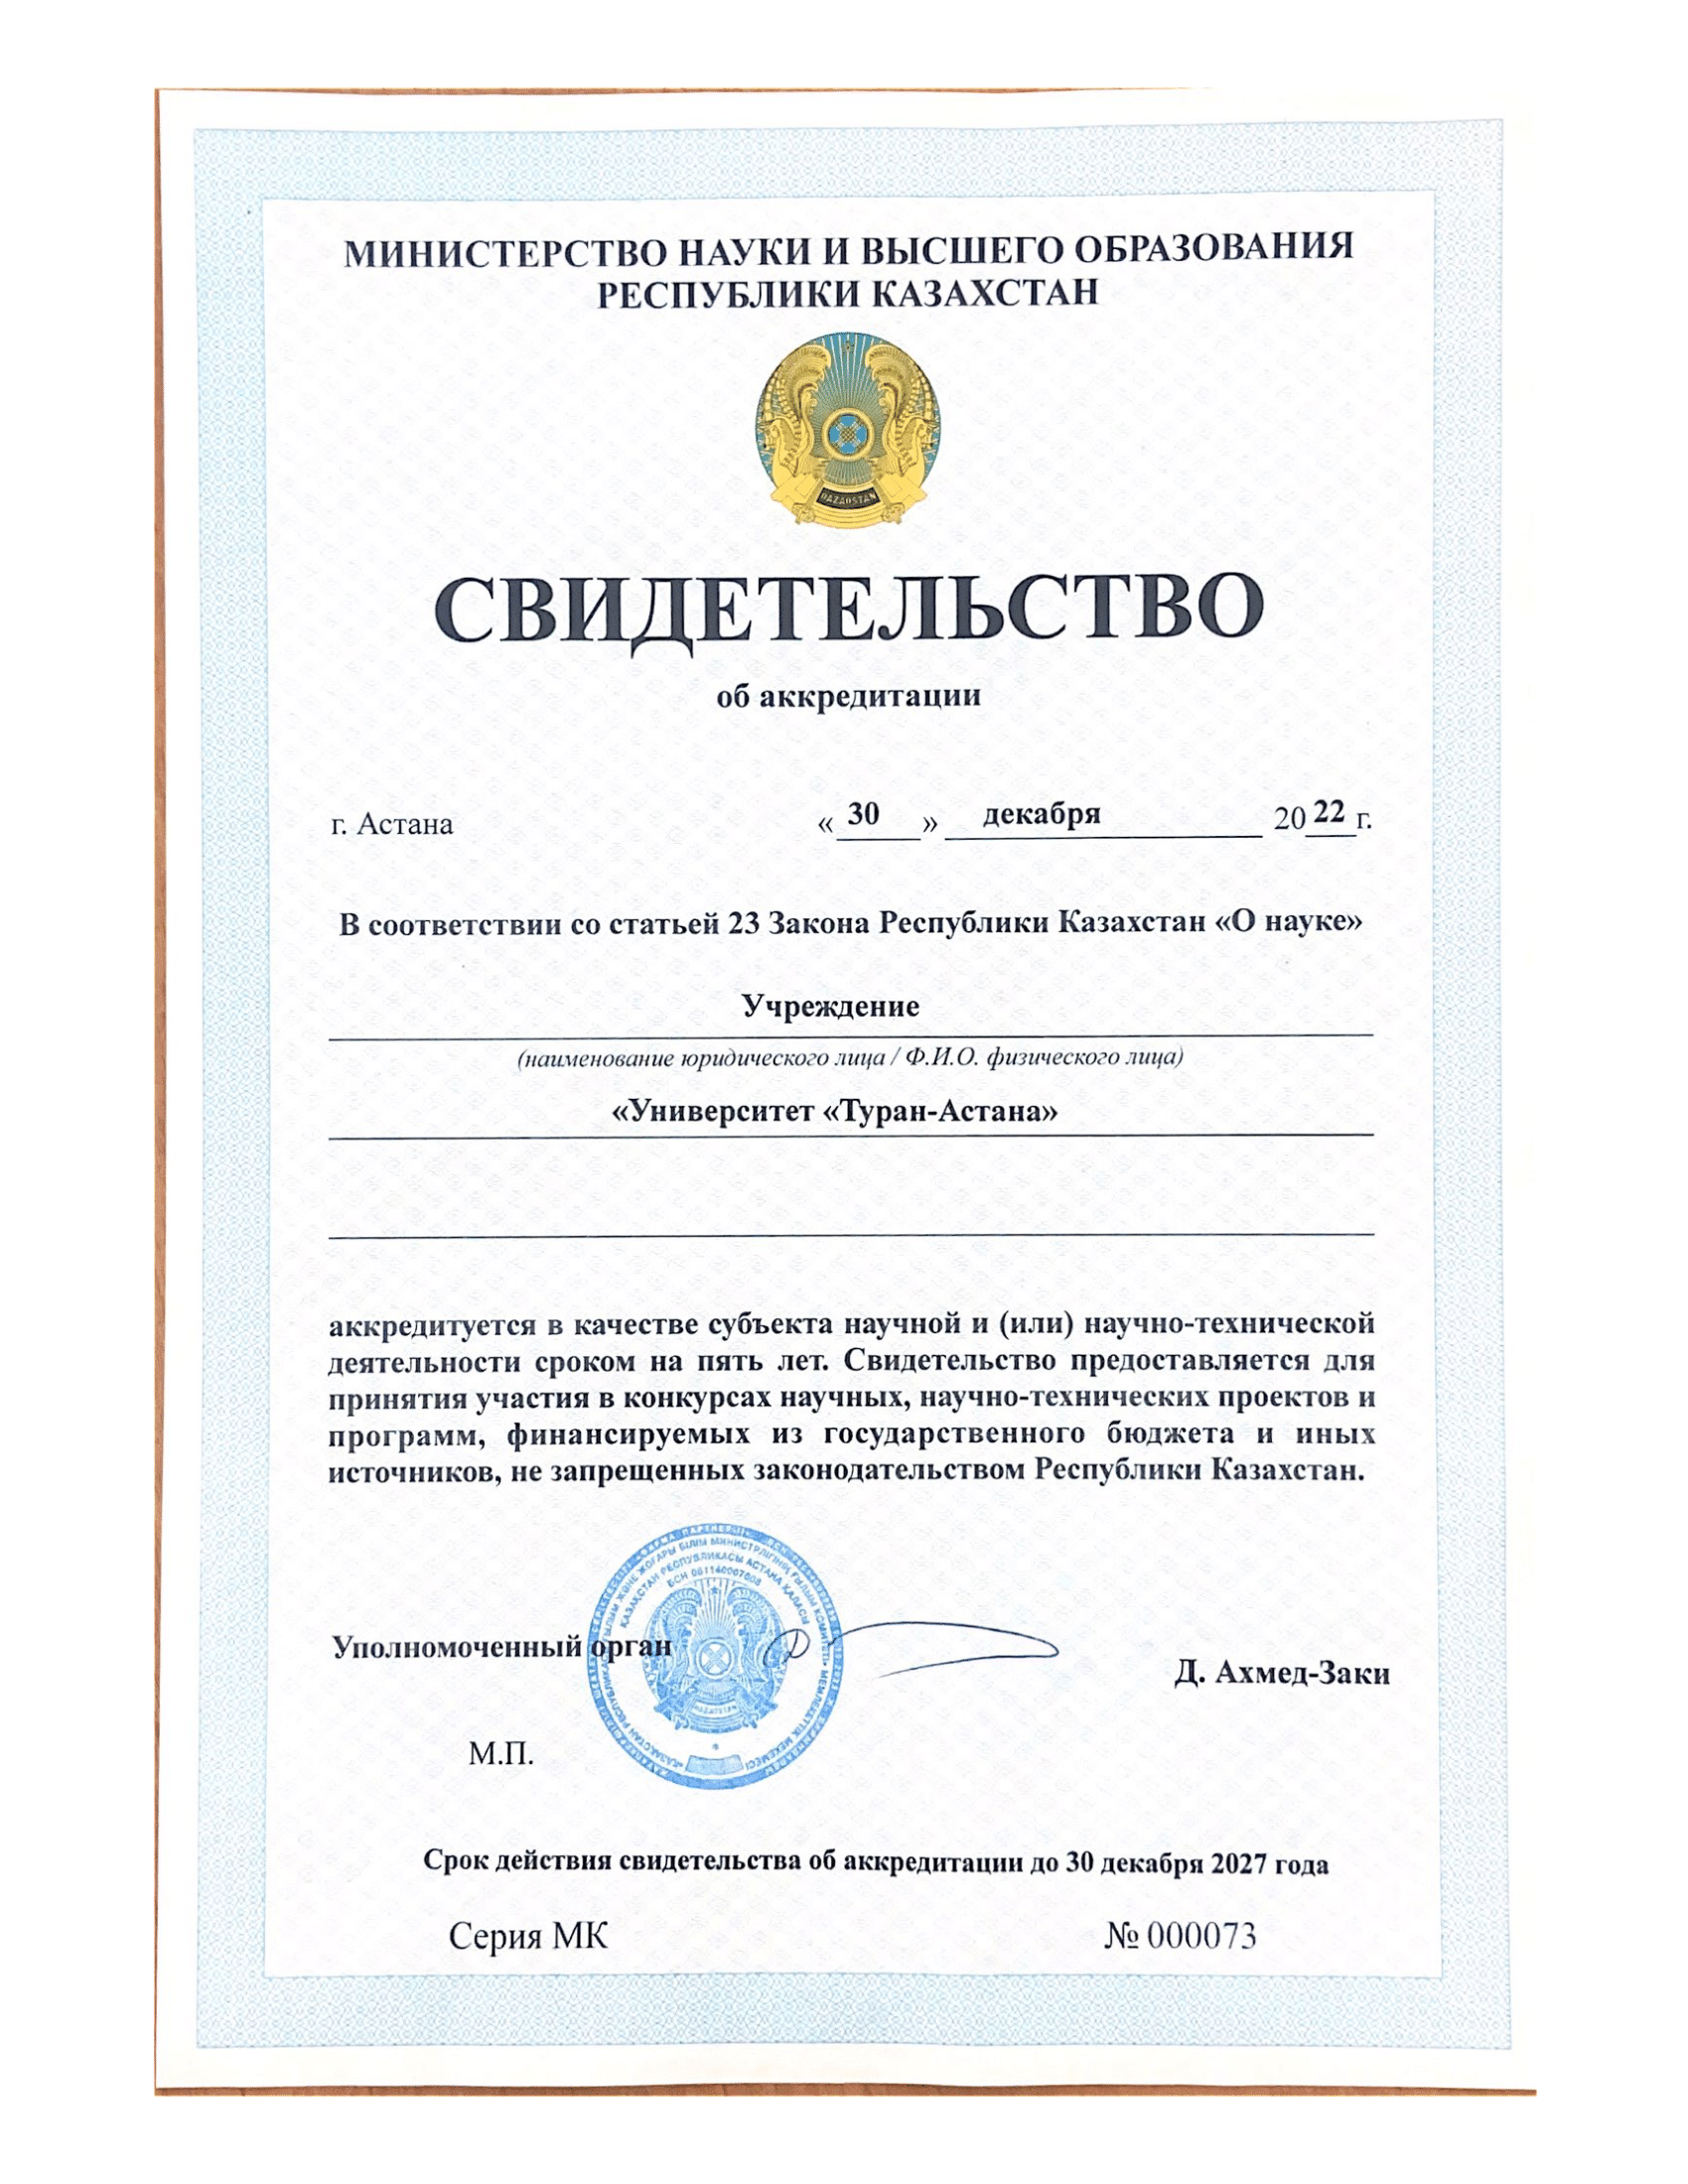 Certificate of Accreditation of Scientific and Technical Activities